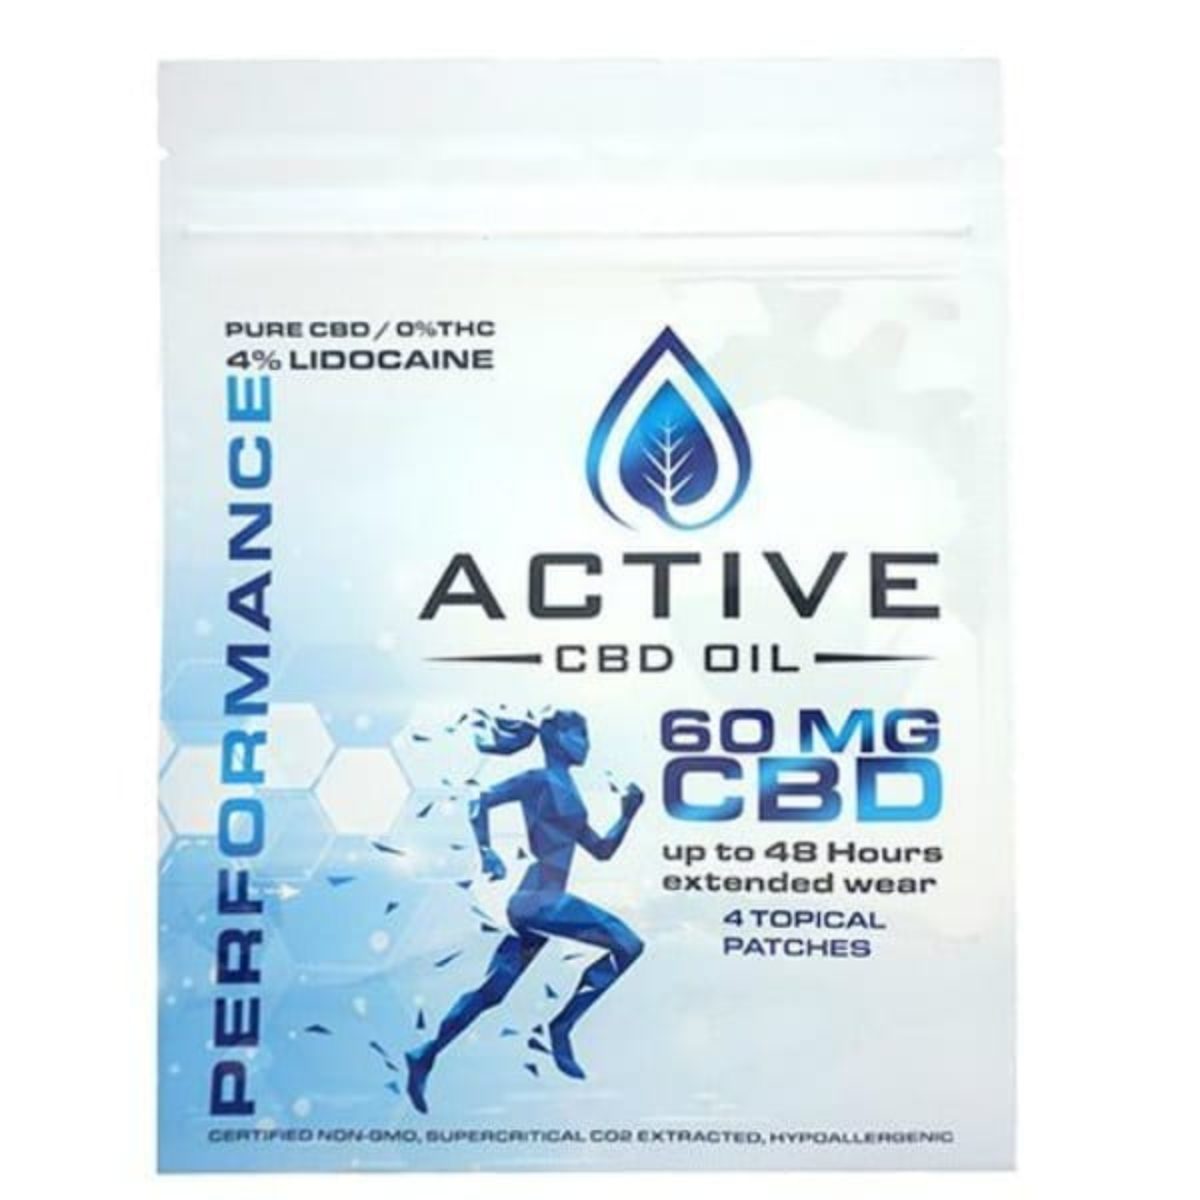 Active CBD Performance Patch pack of 4 - 60mg per